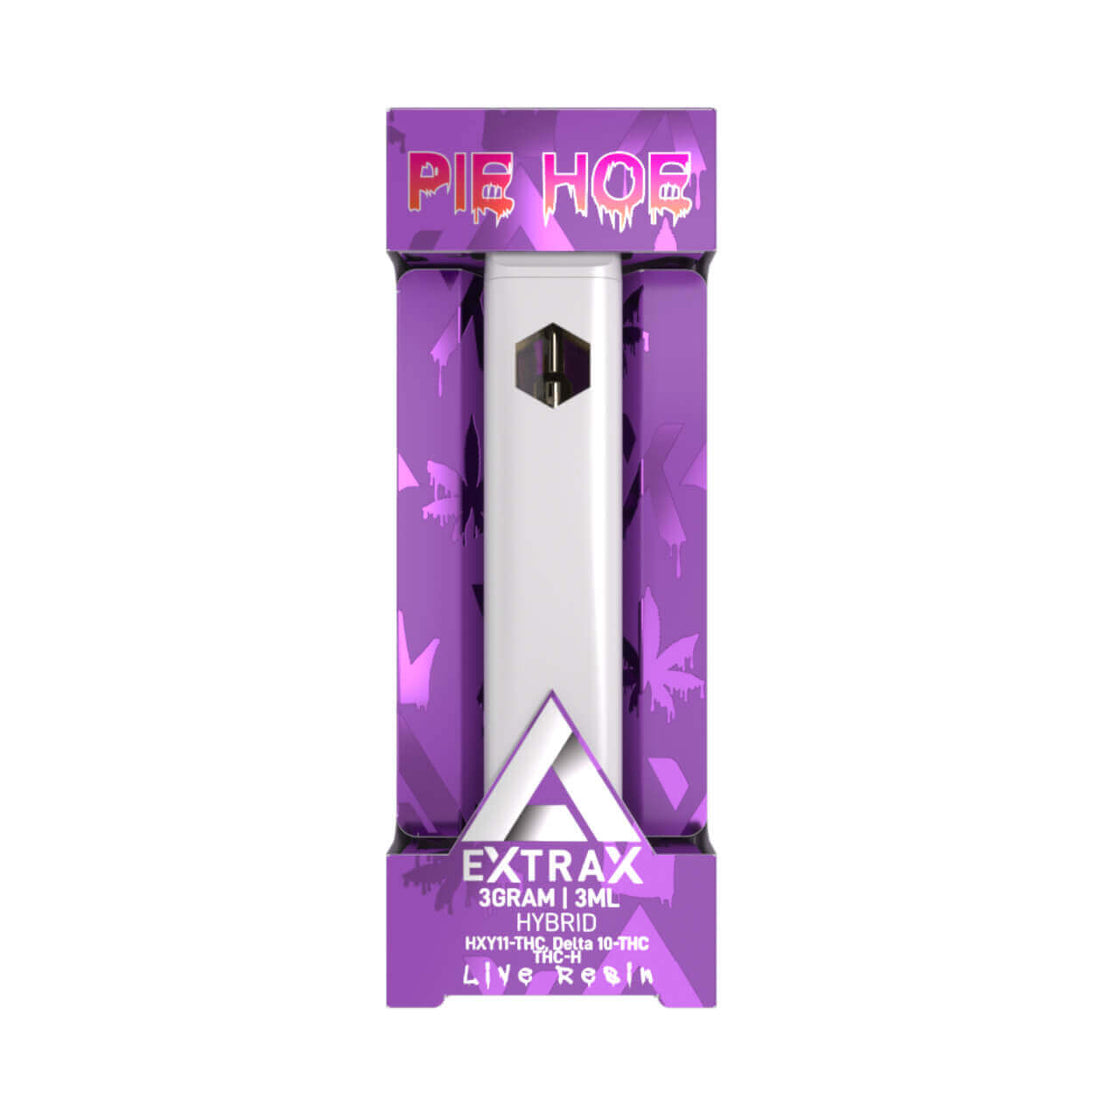 EXTRAX HXY11-THC, DELTA 10-THC THC-H (3GM) LIVE RESIN DISPOSABLE